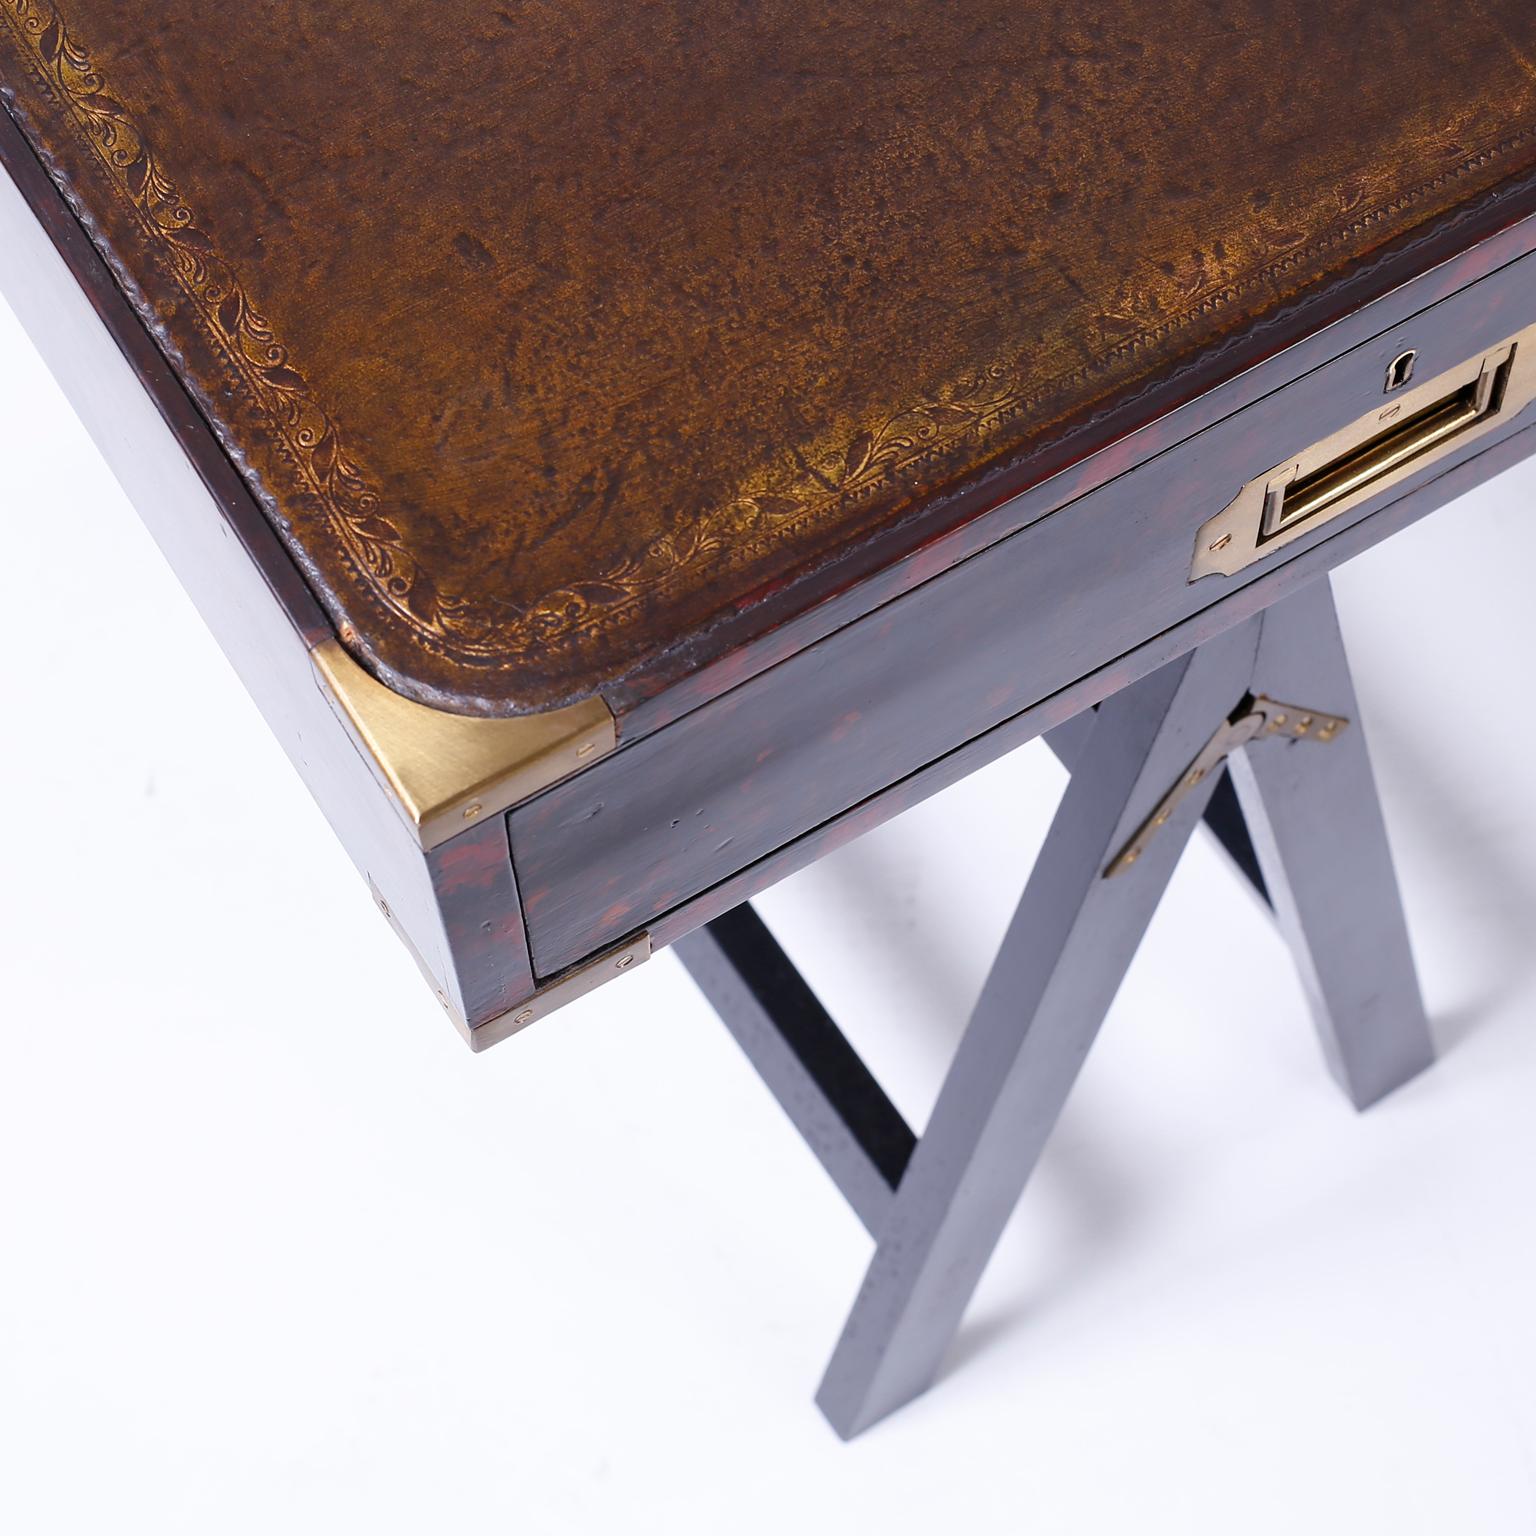 Brass 19th Century English Campaign Style Desk with a Faux Tortoise Shell Finish